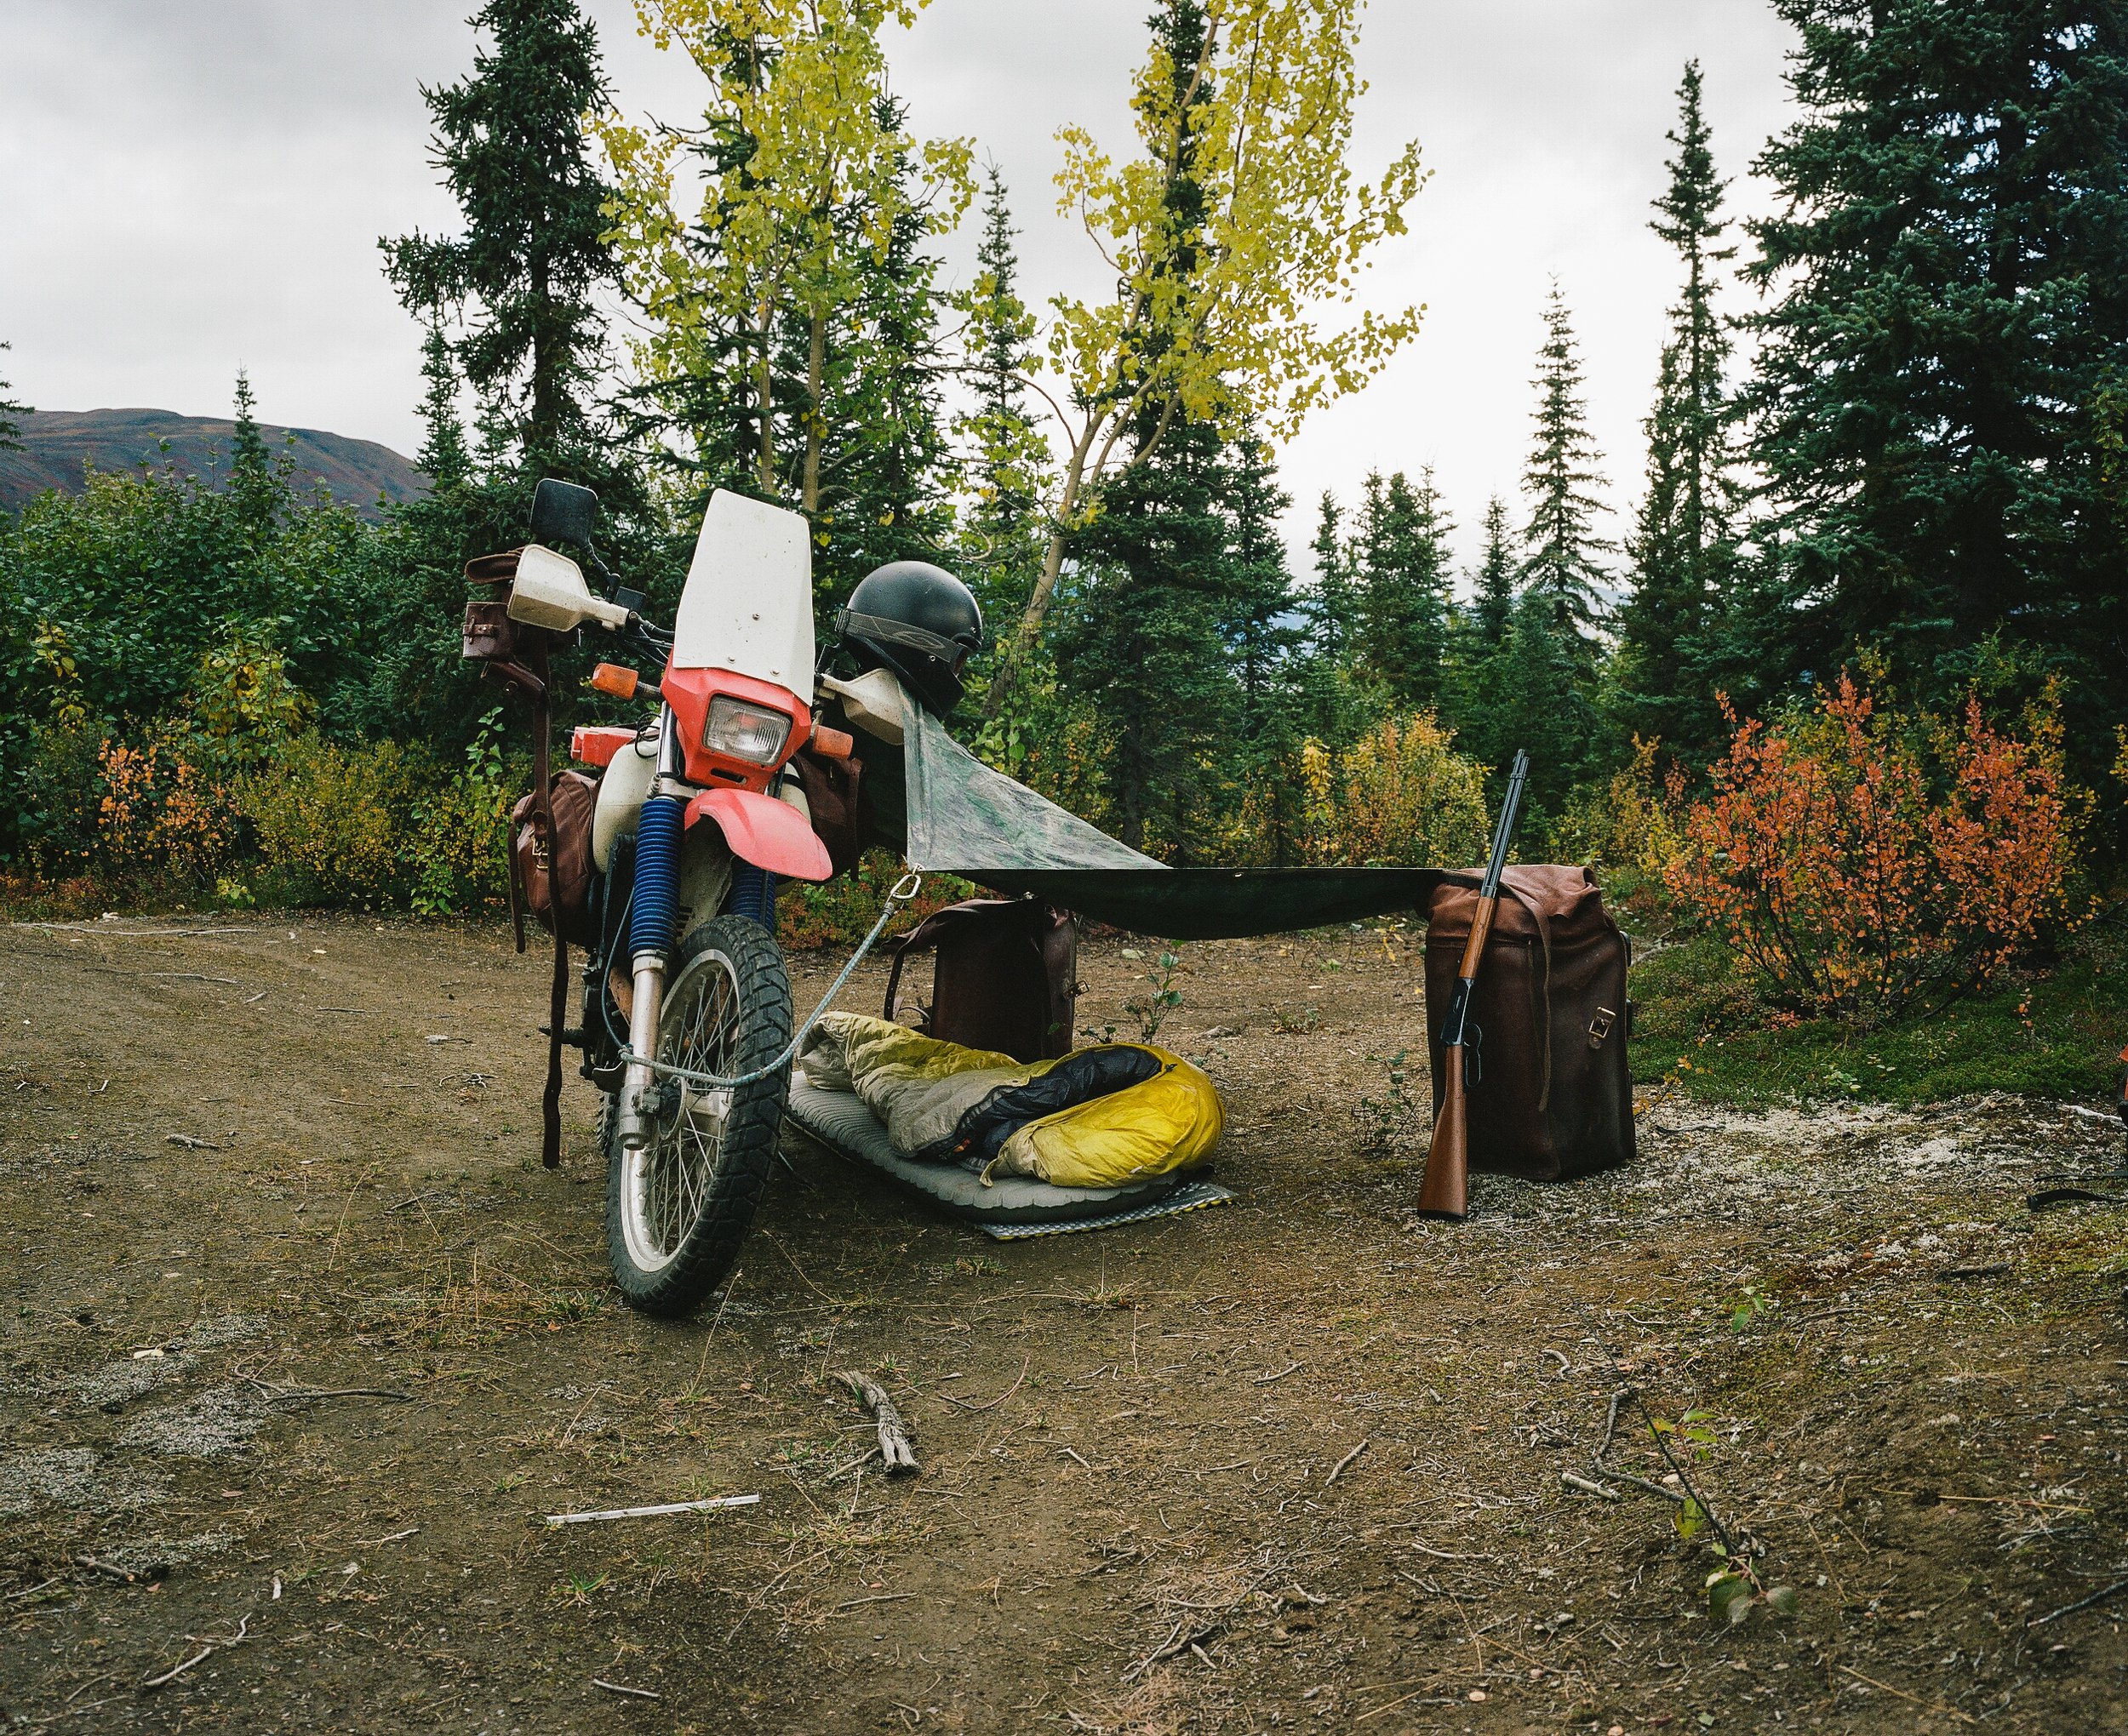  Motorcycle with small camp set up with trees and yellowing leaves. 